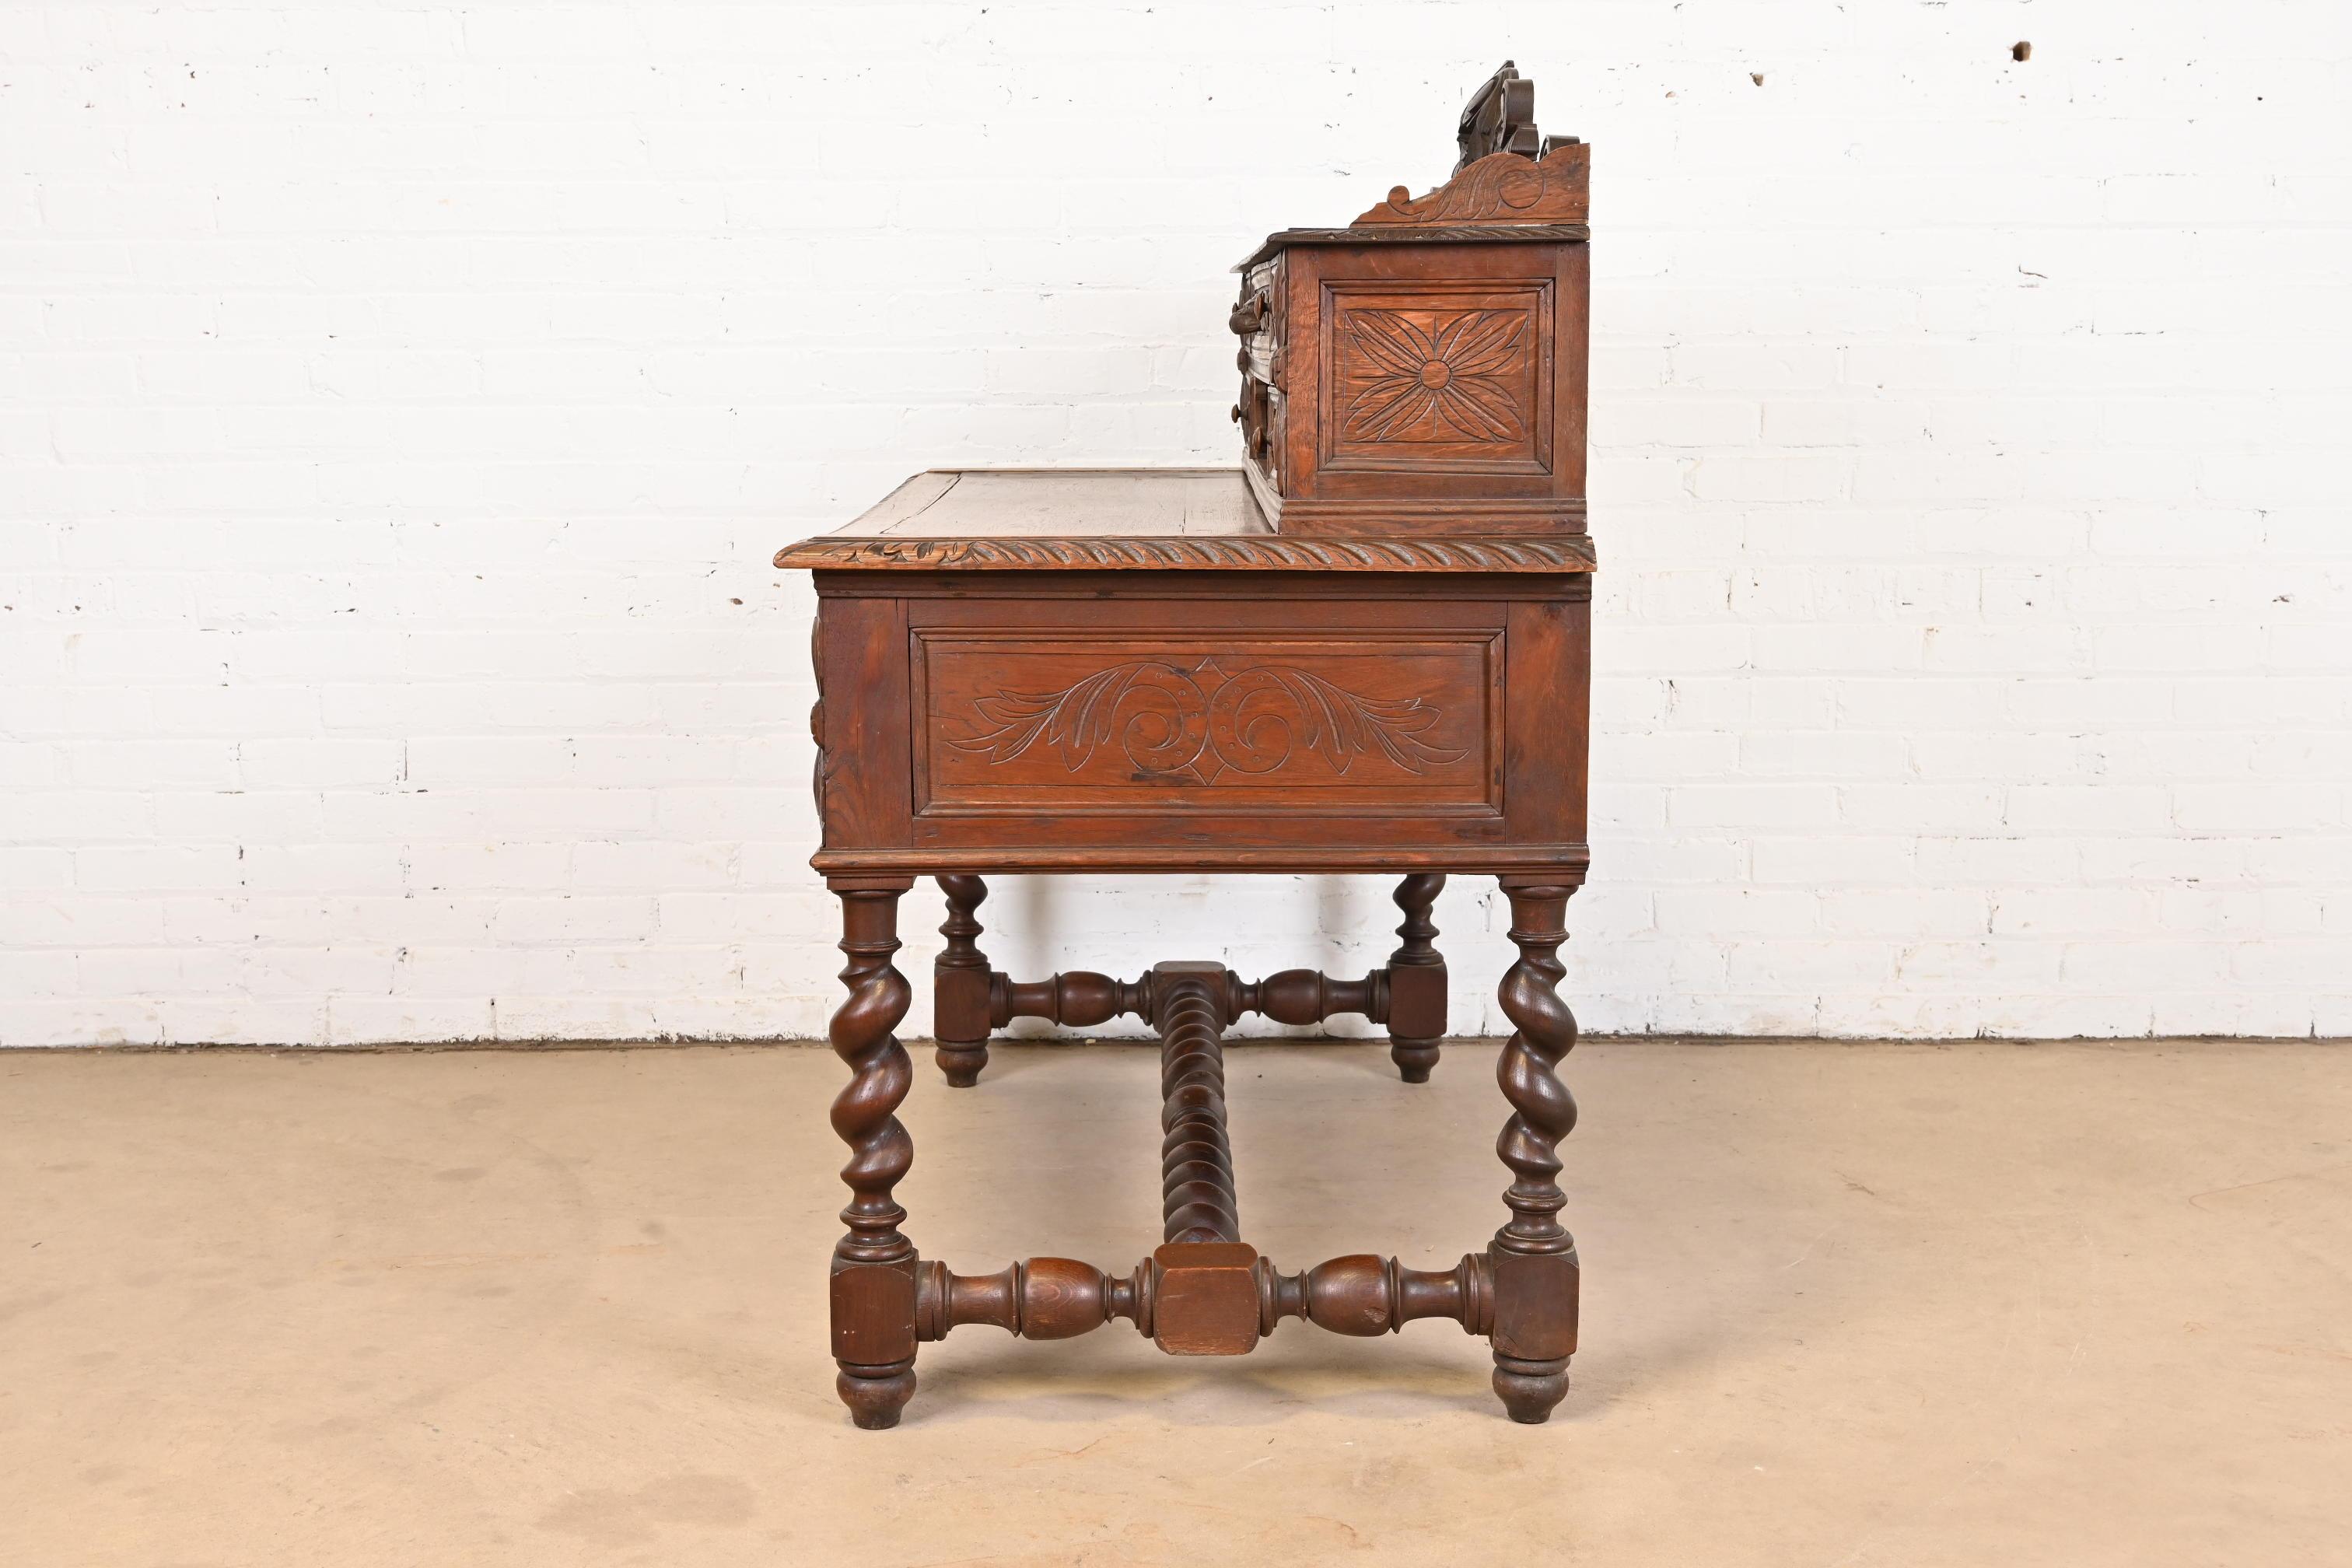 19th Century French Black Forest Carved Oak Writing Desk With Barley Twist Legs For Sale 12